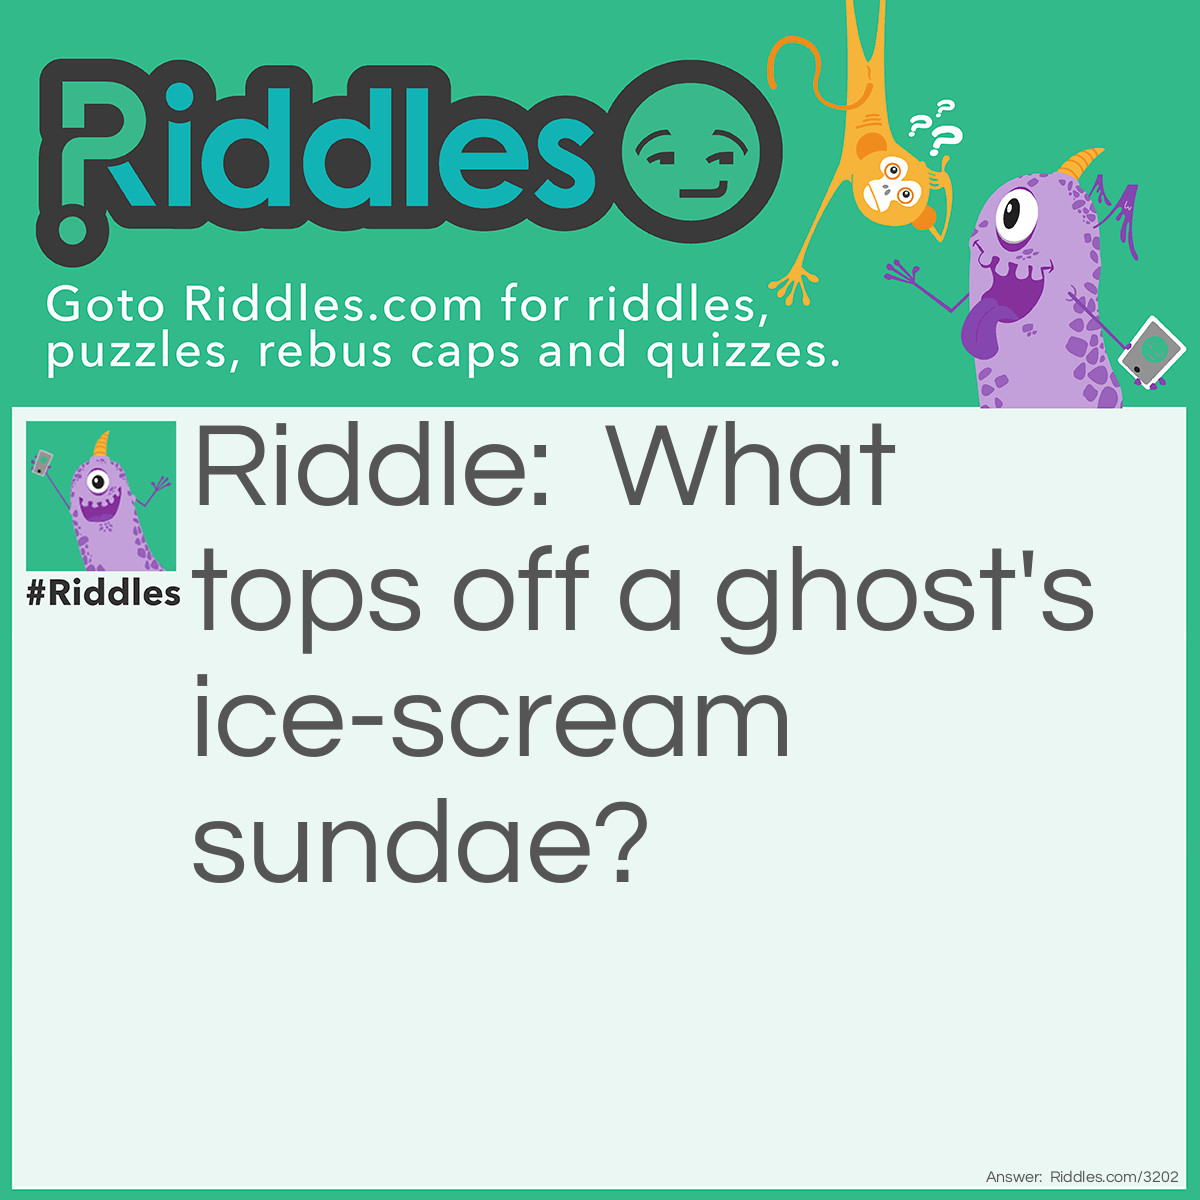 Riddle: What tops off a ghost's ice-scream sundae? Answer: Whipped Scream.